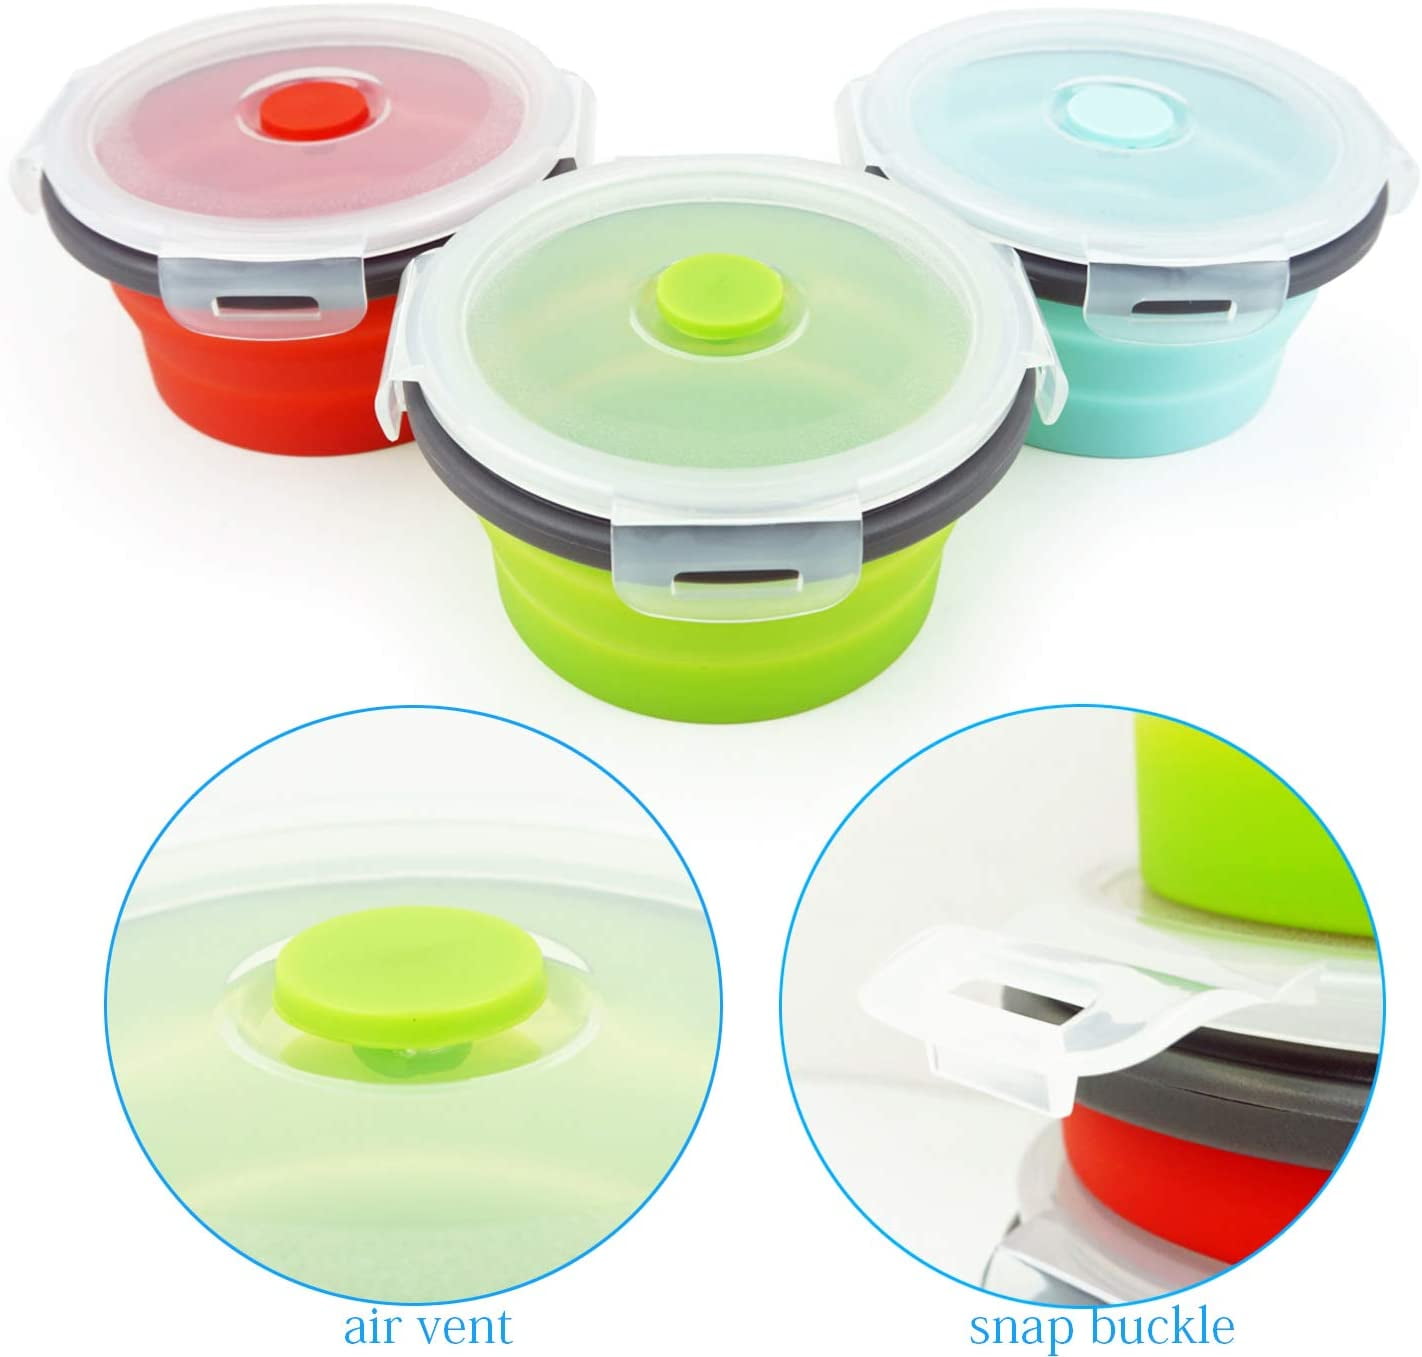 EcoMorning ECOmorning Set of 4 Collapsible Containers Food Storage Collapsible  Bowls for Camping Collapsible Silicone Food Containers